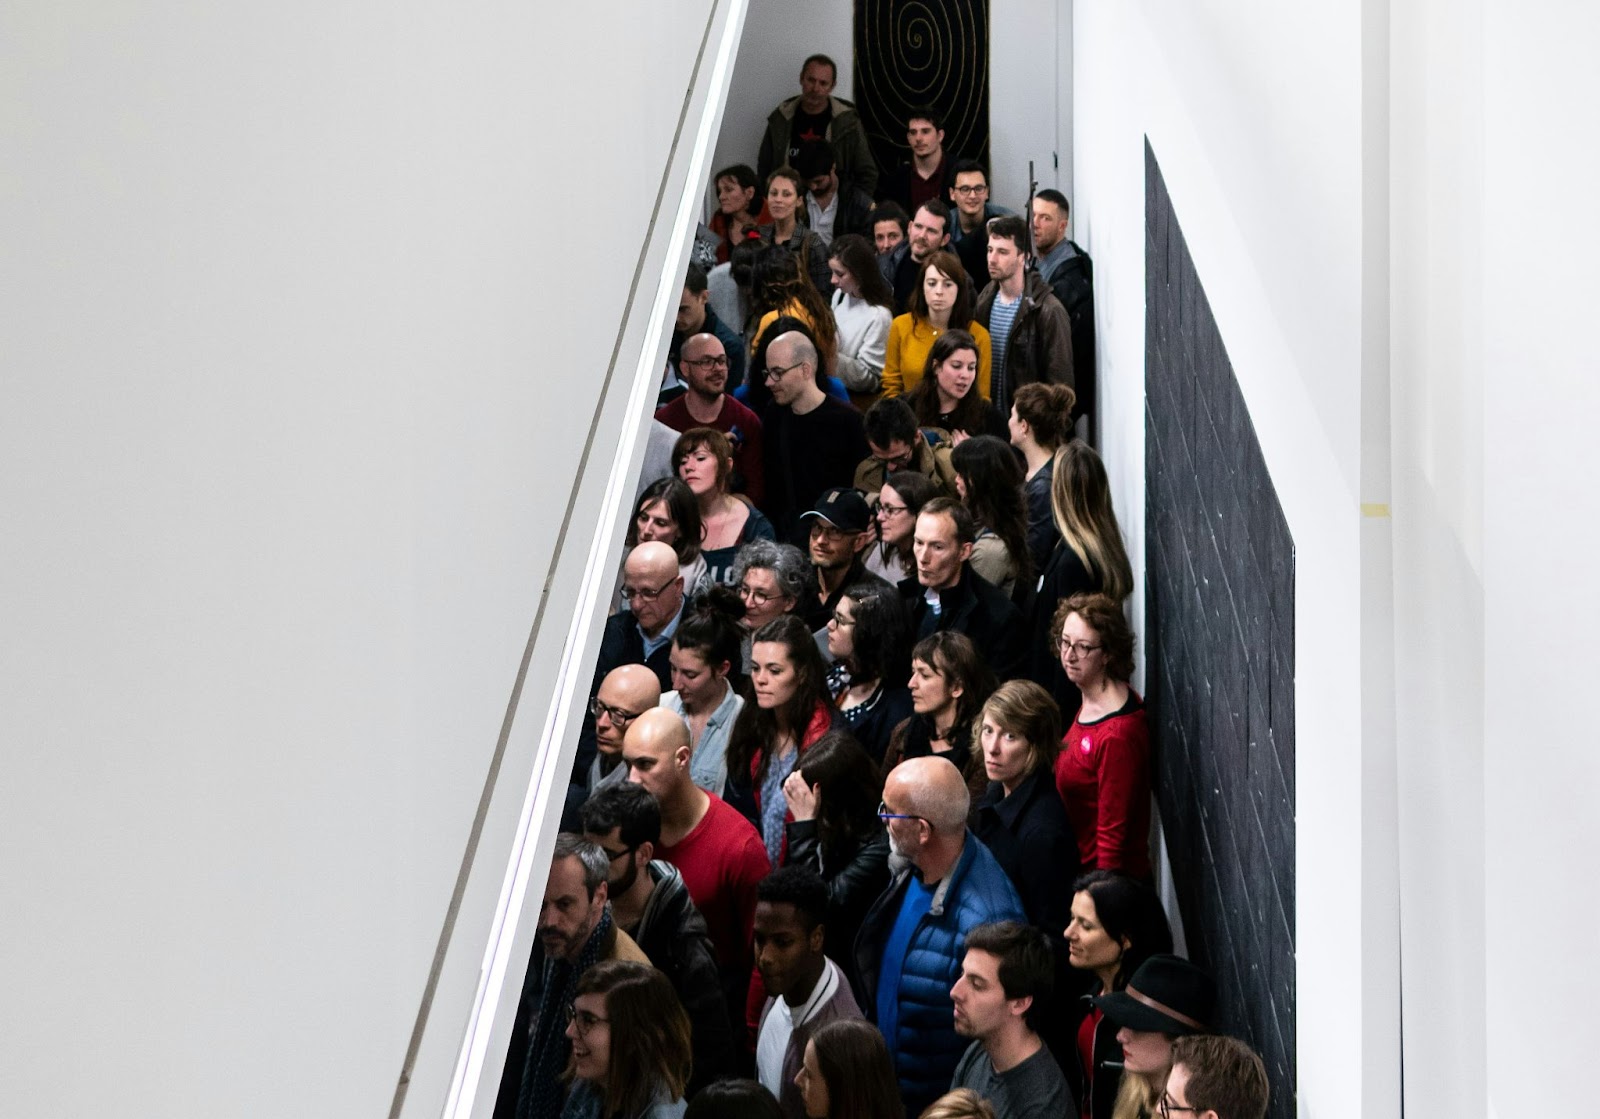 Considering the road not taken: Looking down on a crowd ov visitors at the Musée des Beaux-Arts, Angers, France.